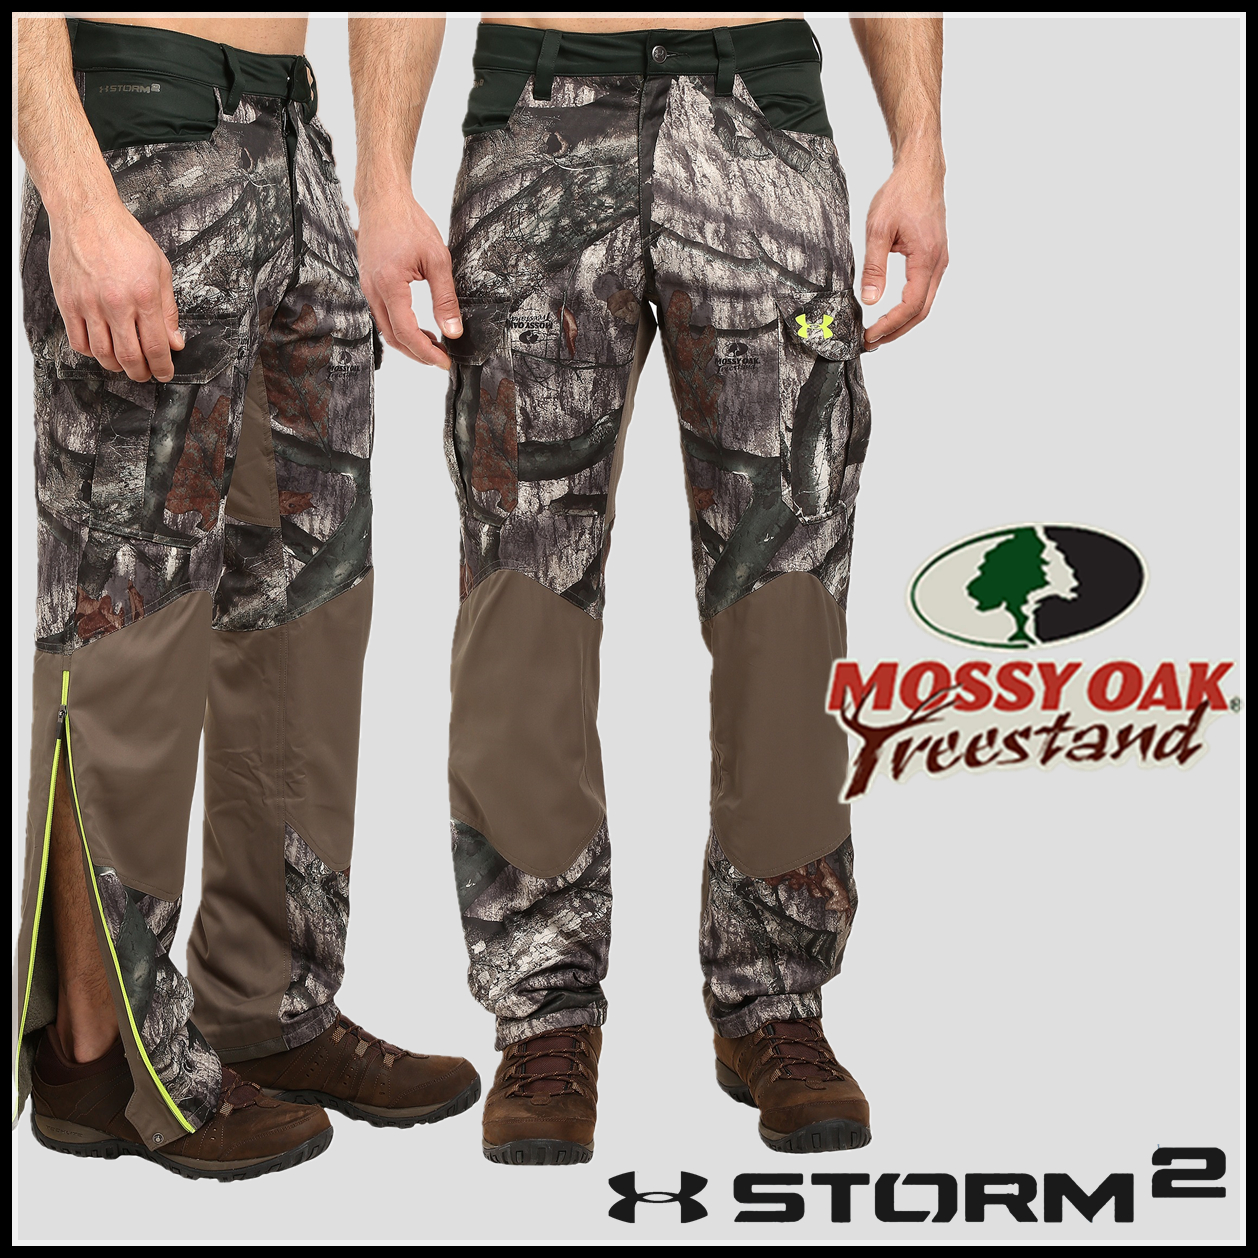 under armour mossy oak treestand pants